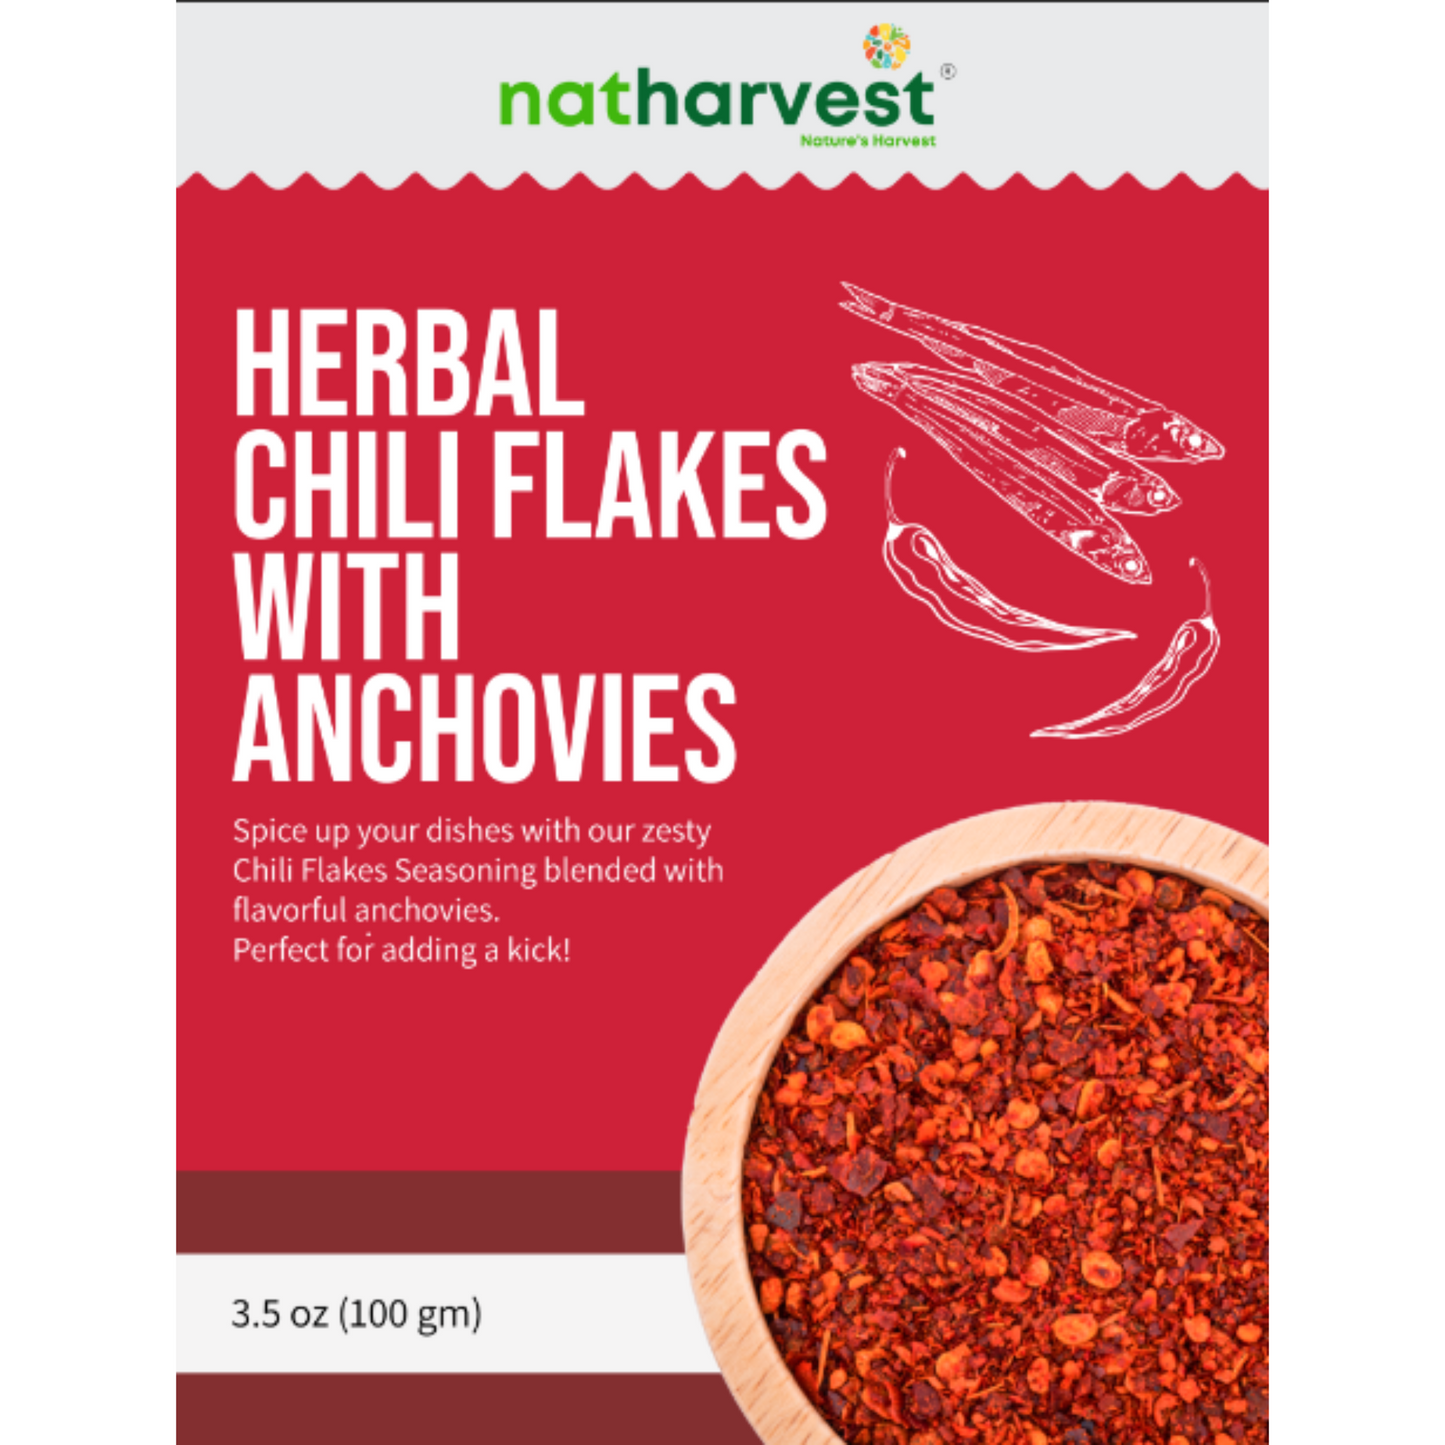 Natharvest Herbal Chili Flakes with Anchovies, medium-level spicy, 3.5 oz (100 gm)